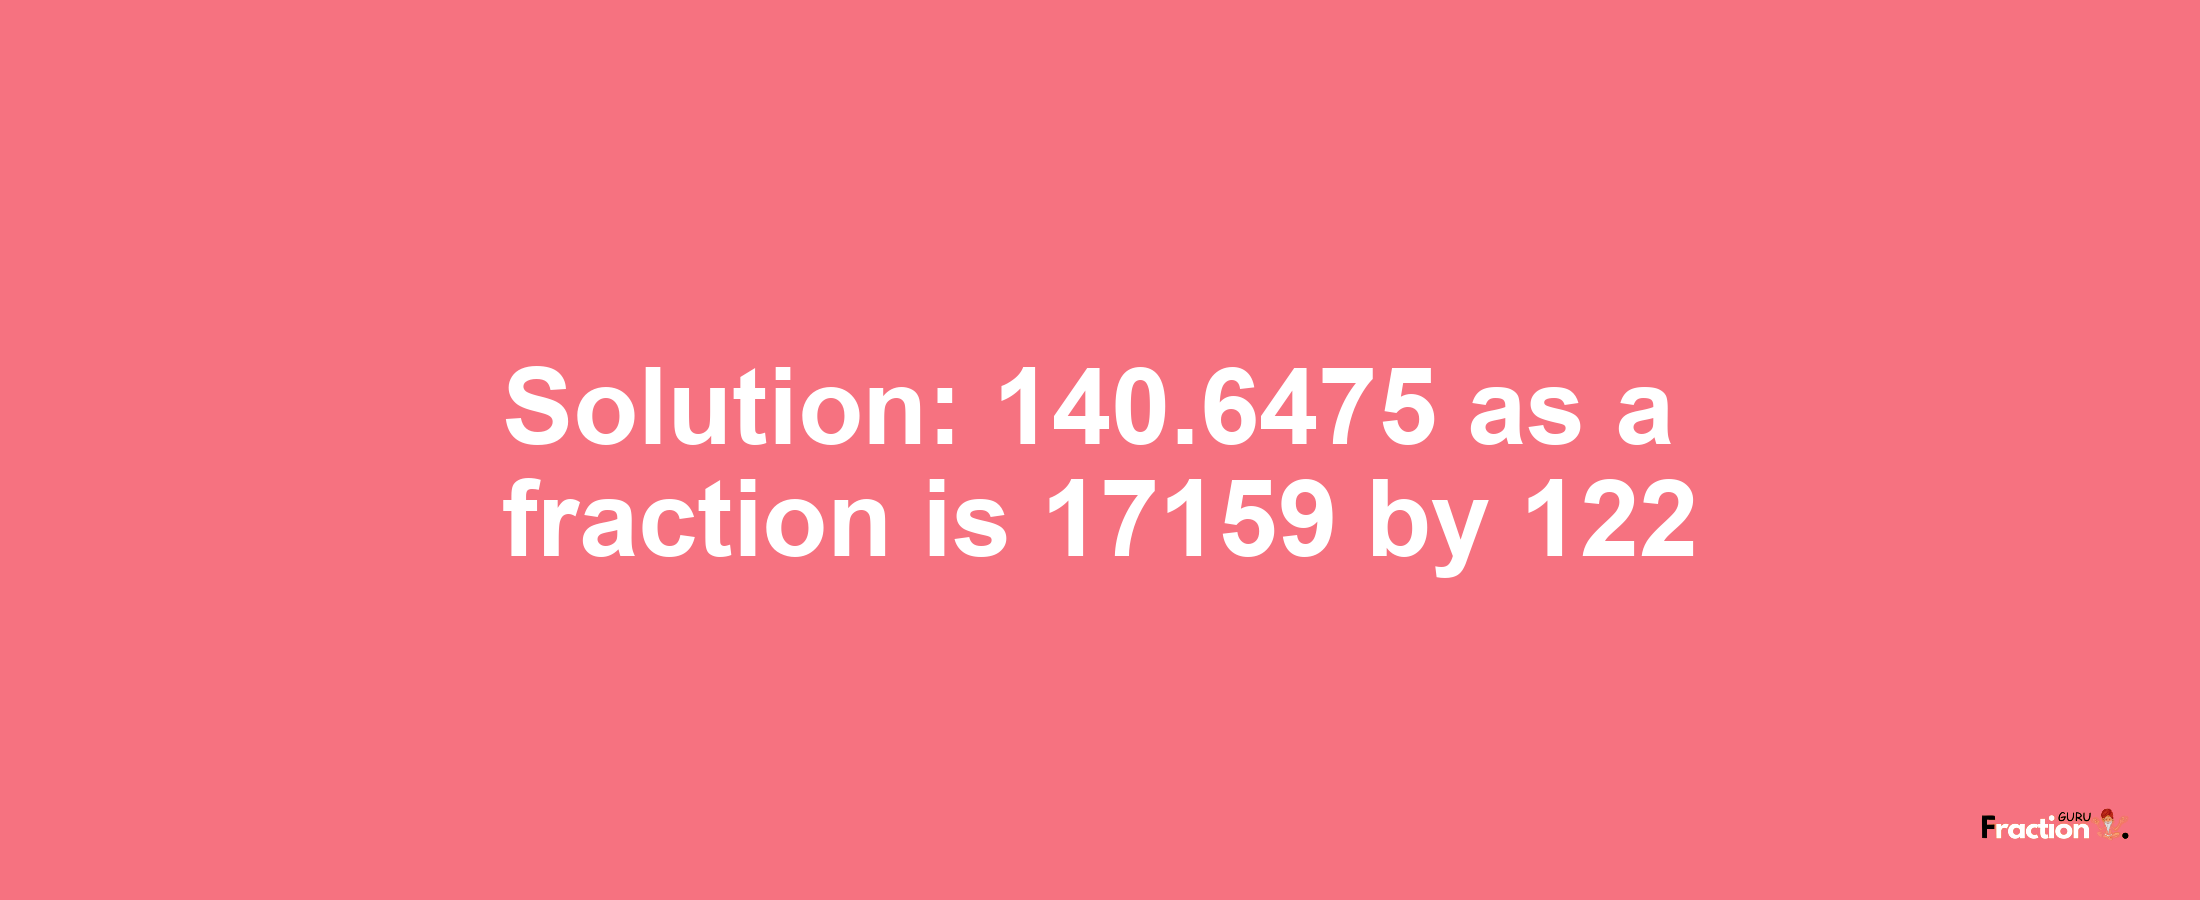 Solution:140.6475 as a fraction is 17159/122